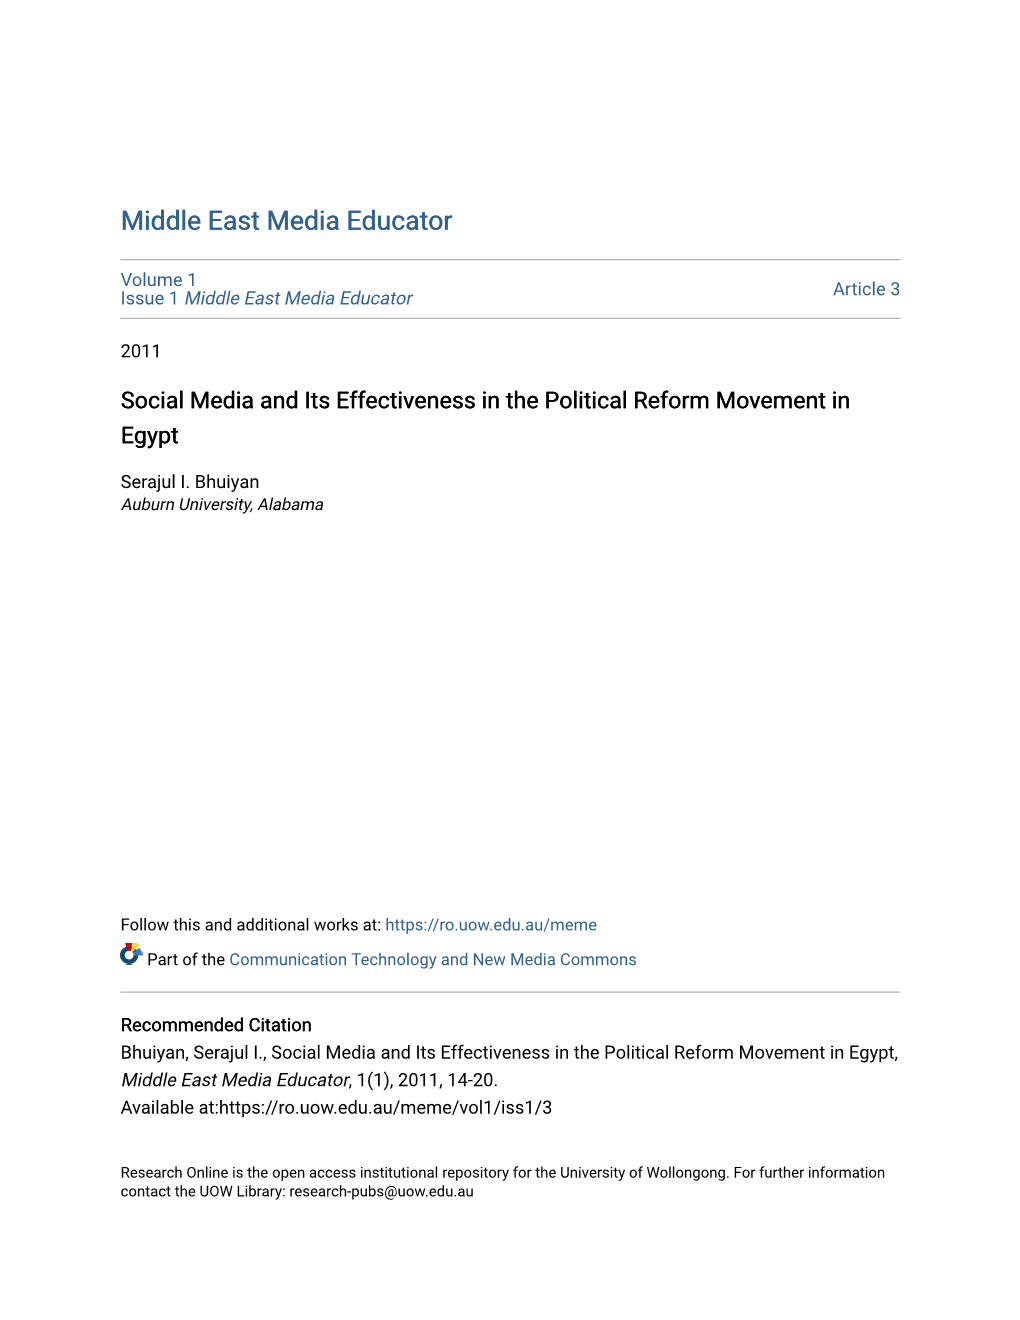 Social Media and Its Effectiveness in the Political Reform Movement in Egypt